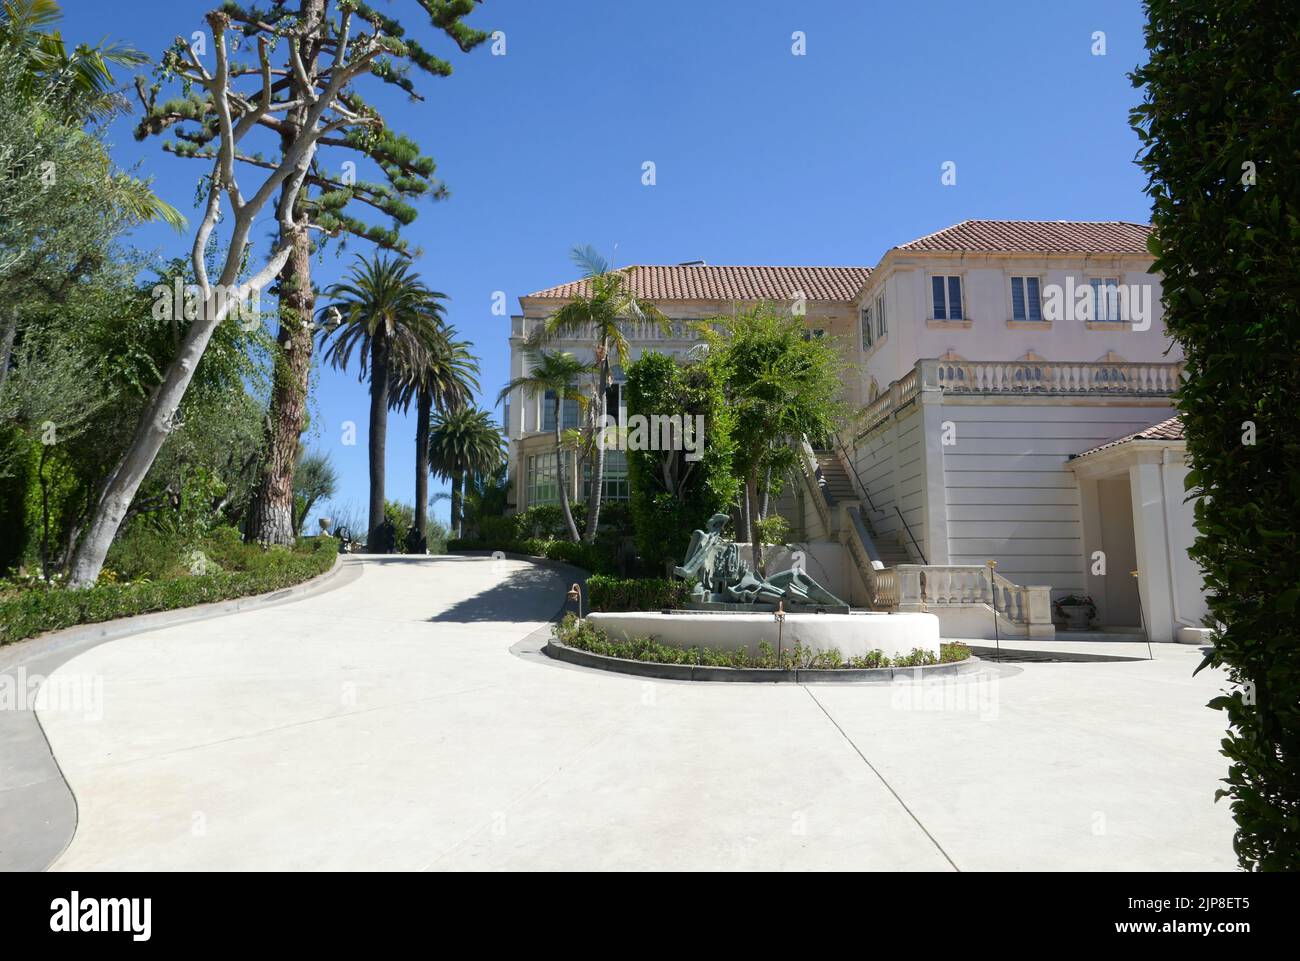 Beverly Hills, California, USA 15th August 2022 Actor Douglas Fairbanks, Actress Mary Pickford's Former home/house, Pickfair Estate at 1143 Summit Drive on August 15, 2022 in Beverly Hills, California, USA. Photo by Barry King/Alamy Stock Photo Stock Photo